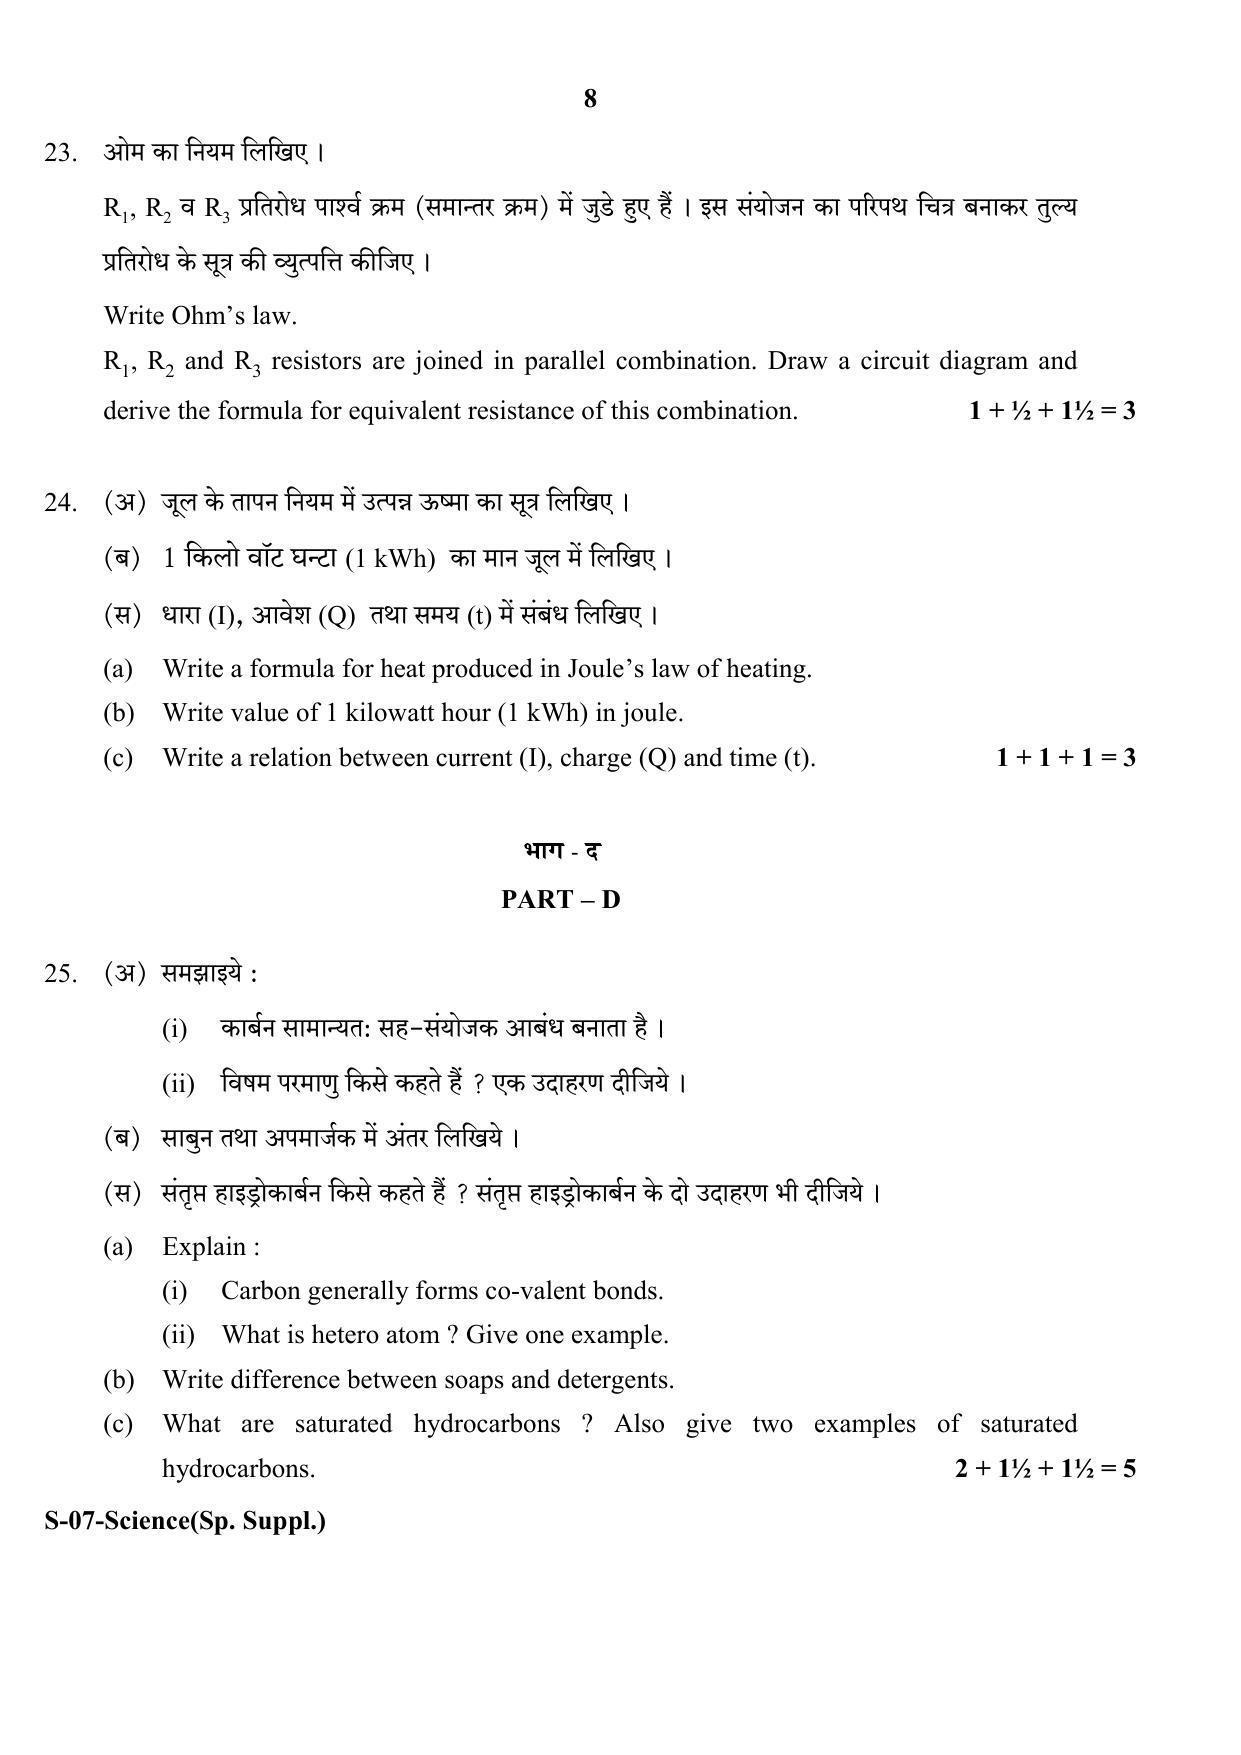 RBSE Class 10 Science ( supplementary) 2017 Question Paper - Page 8